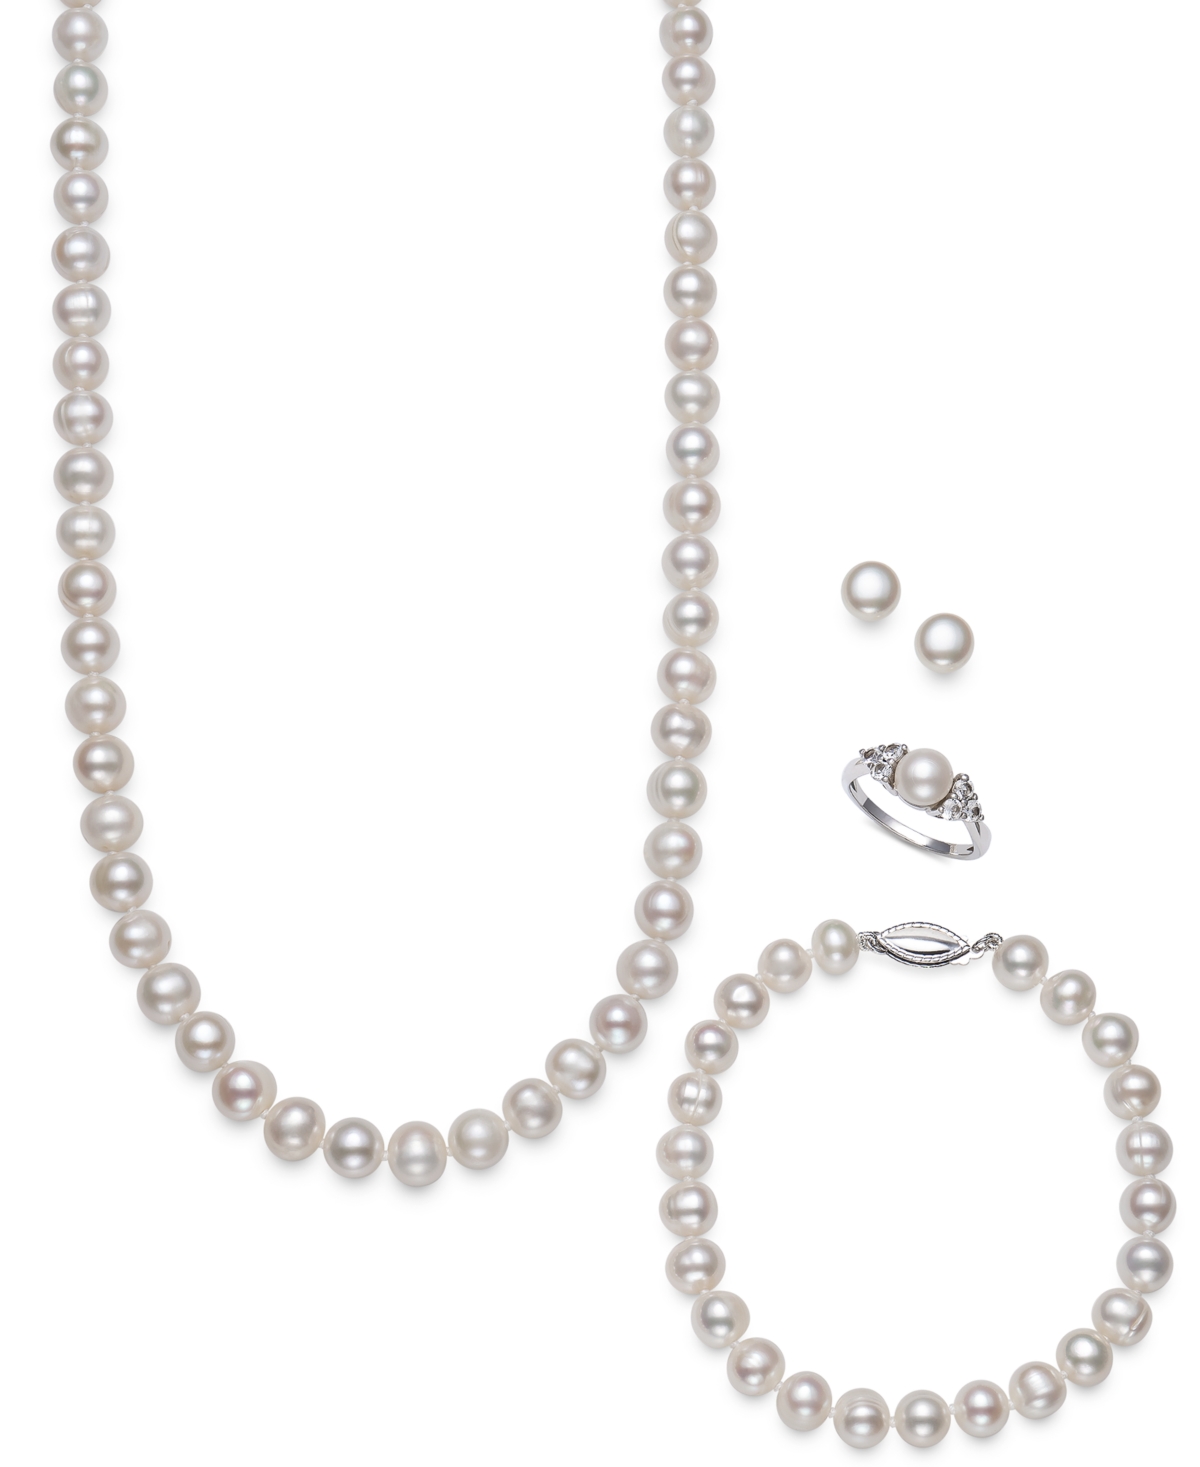 4-Pc. Set Cultured Freshwater Pearl (7-8mm) Necklace, Bracelet, Stud Earrings & Ring in Sterling Silver - Sterling Silver